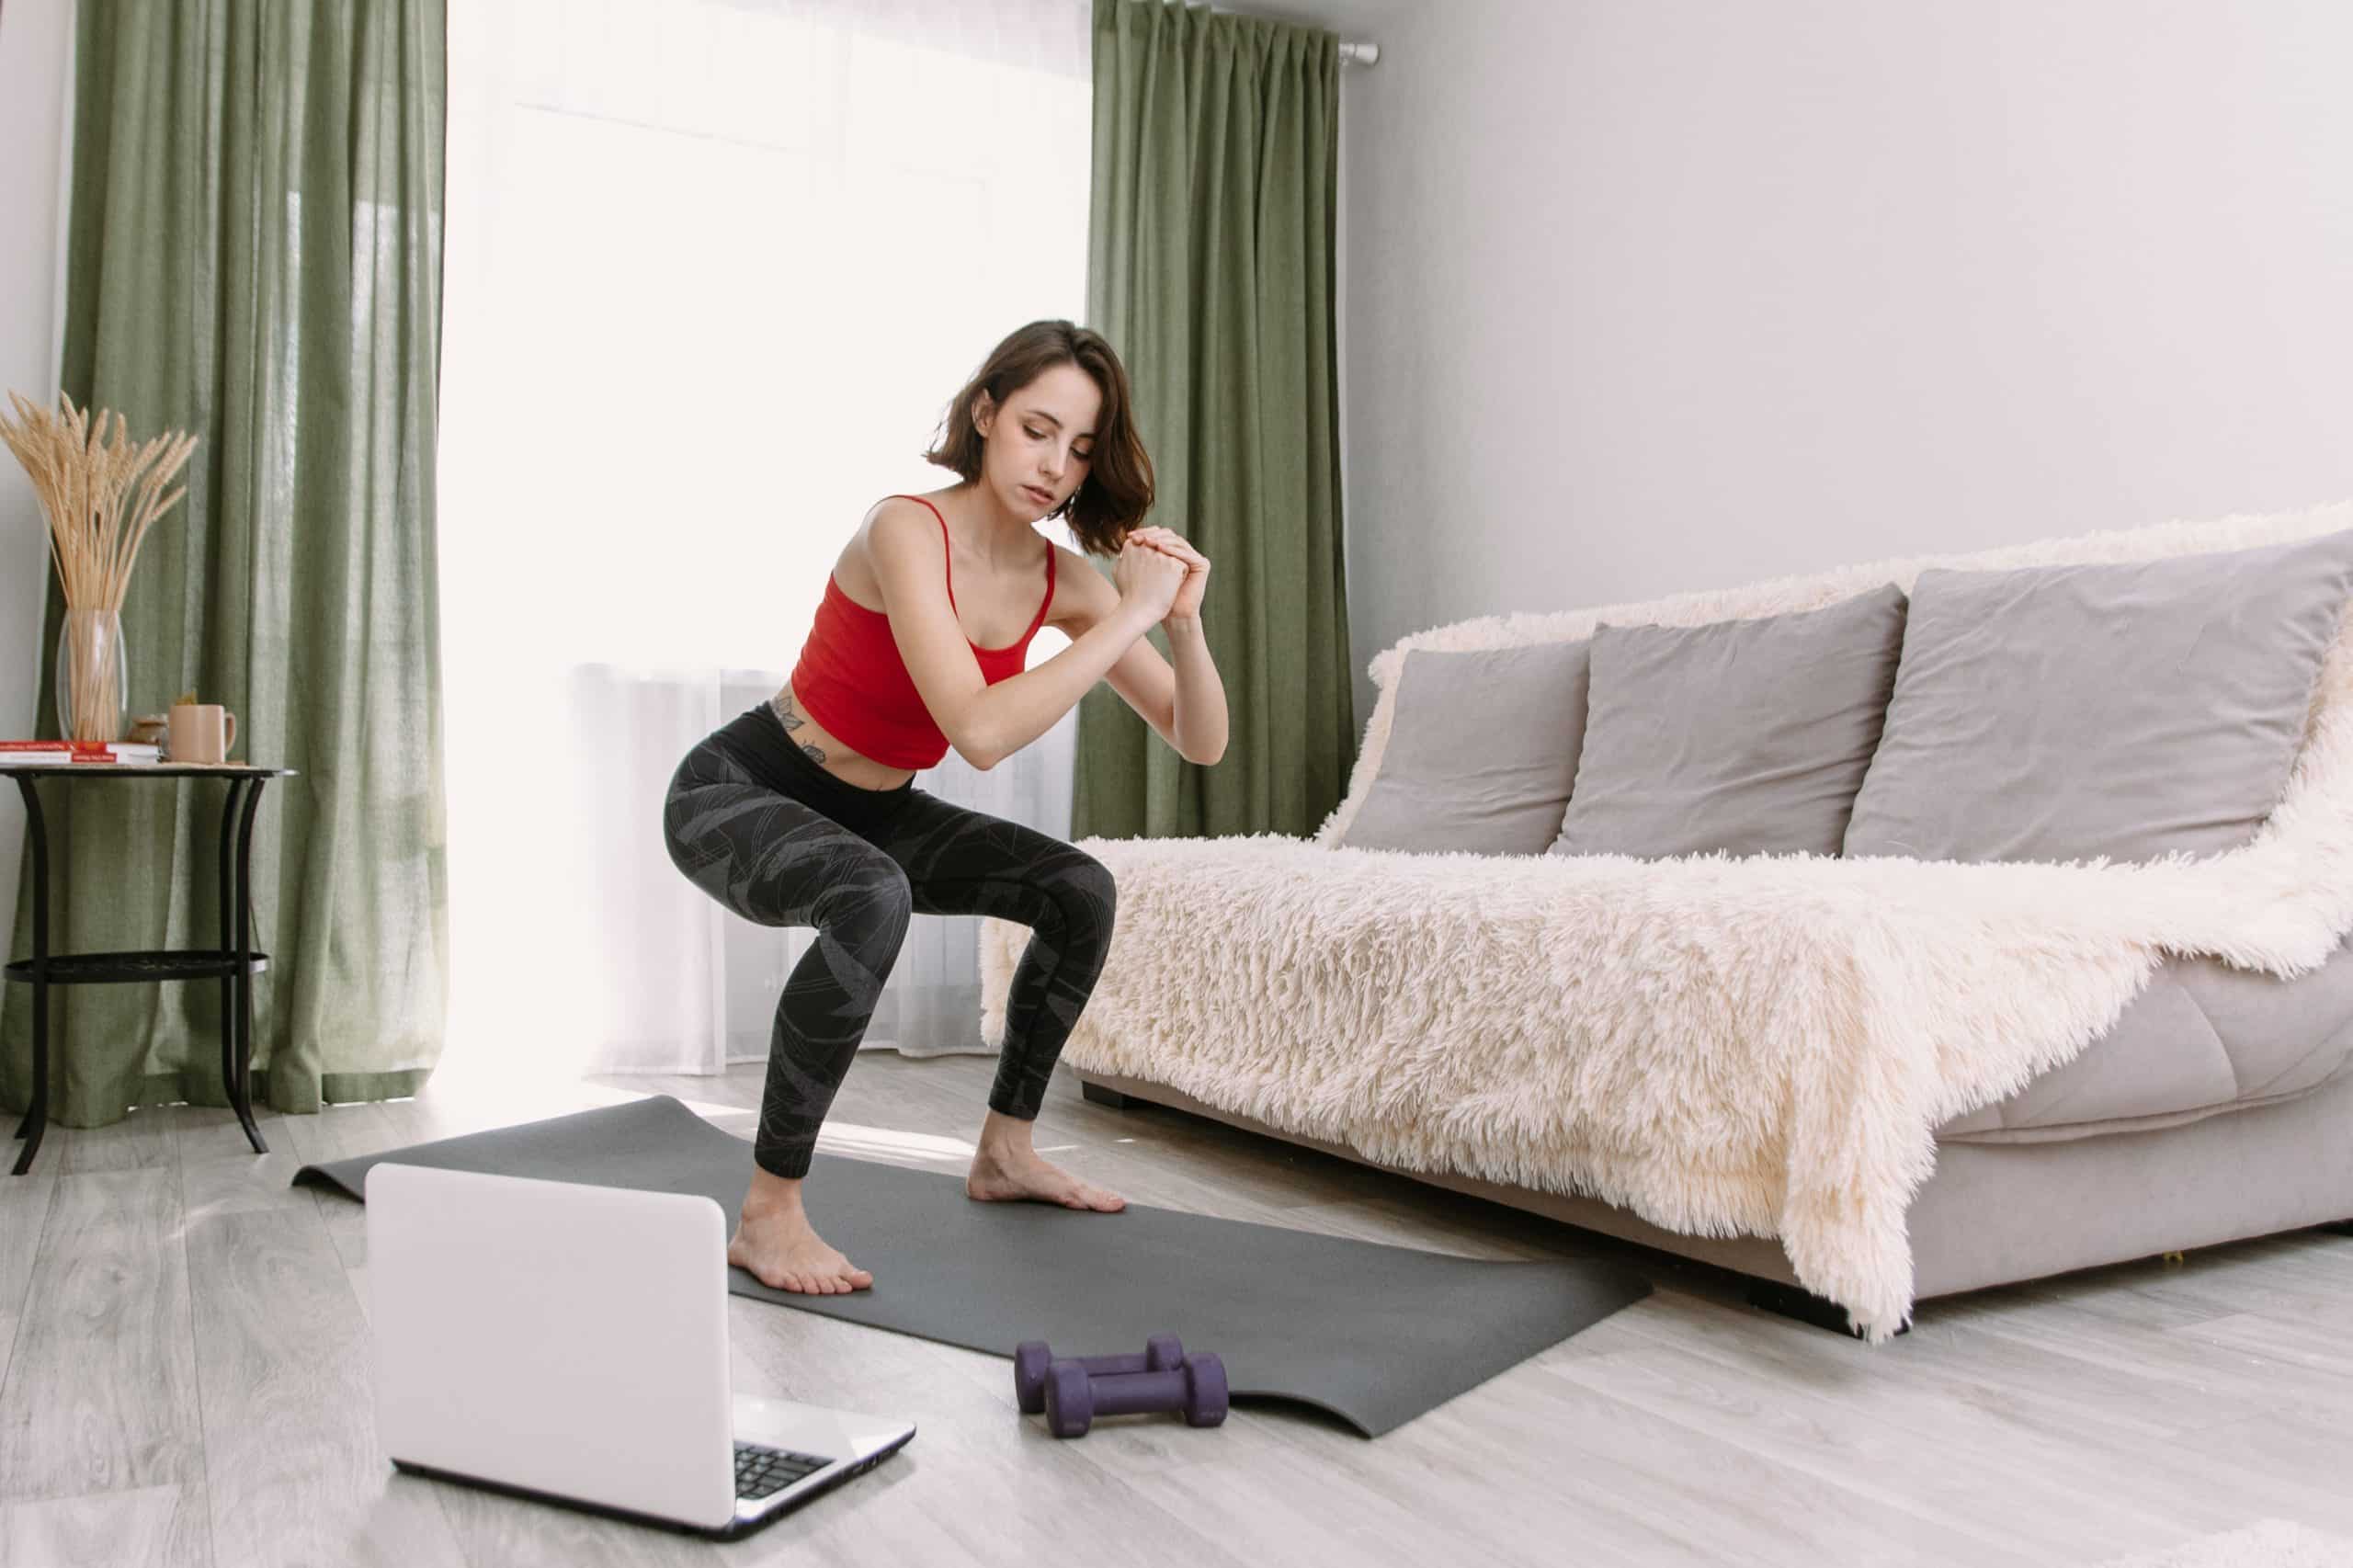 How To Do Sofa Yoga As A Beginner: Everything You Need To Know - BetterMe